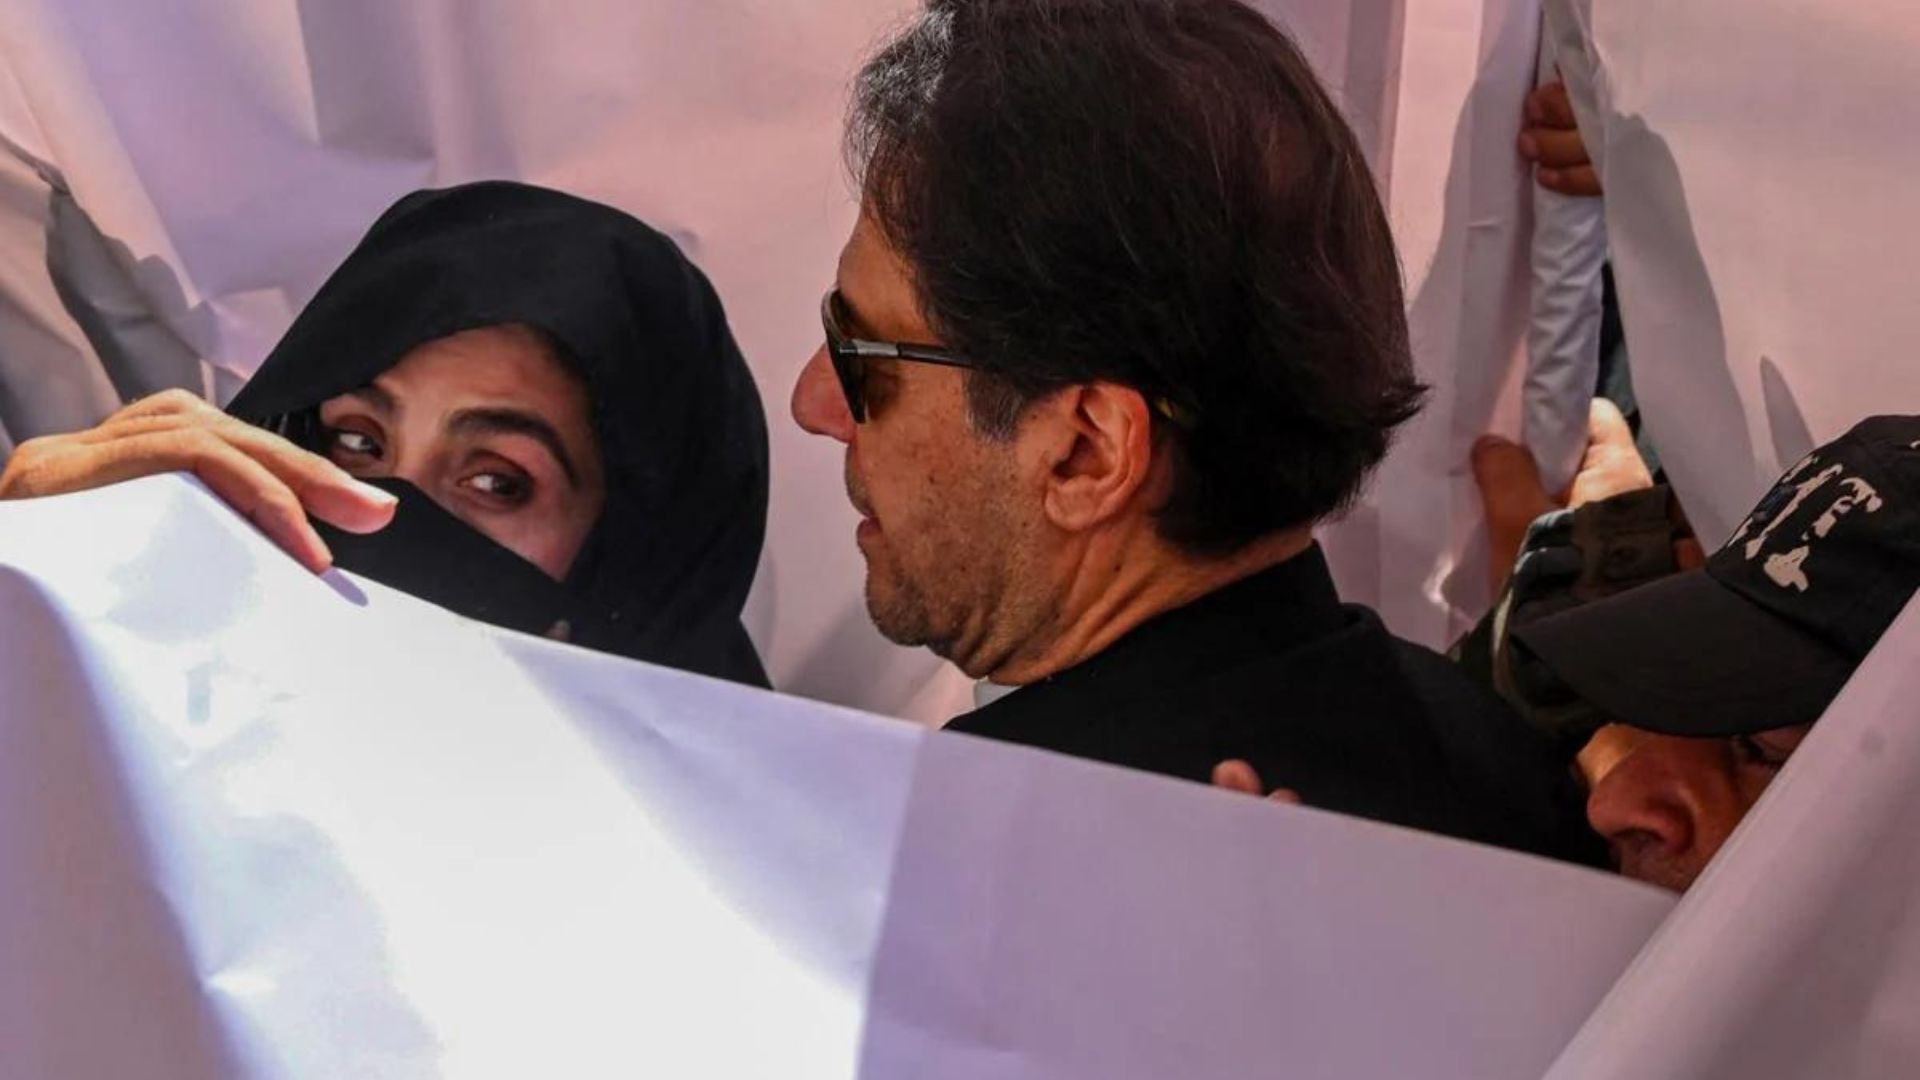 Pakistan’s jailed ex-PM Imran Khan claims his wife Bushra Bibi given food mixed with toilet cleaner in jail